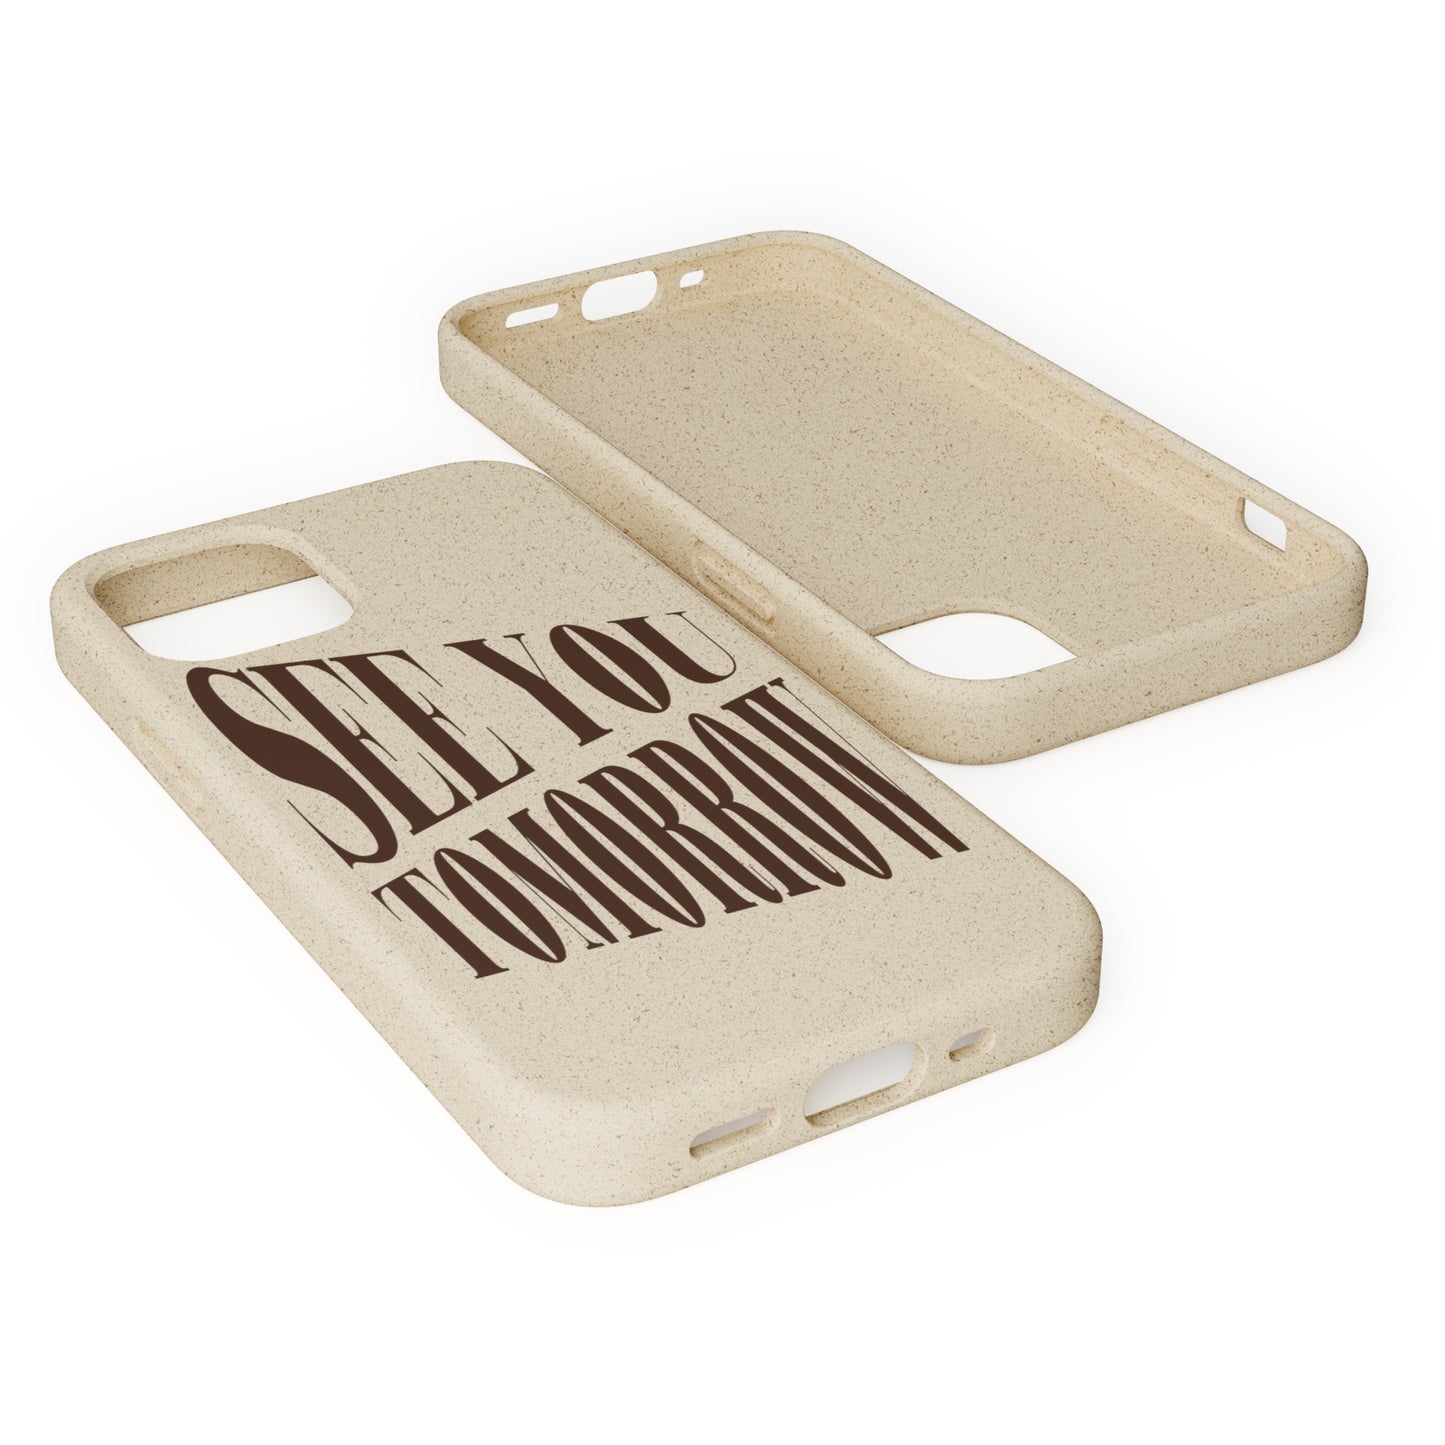 See You Tomorrow Biodegradable Phone Case